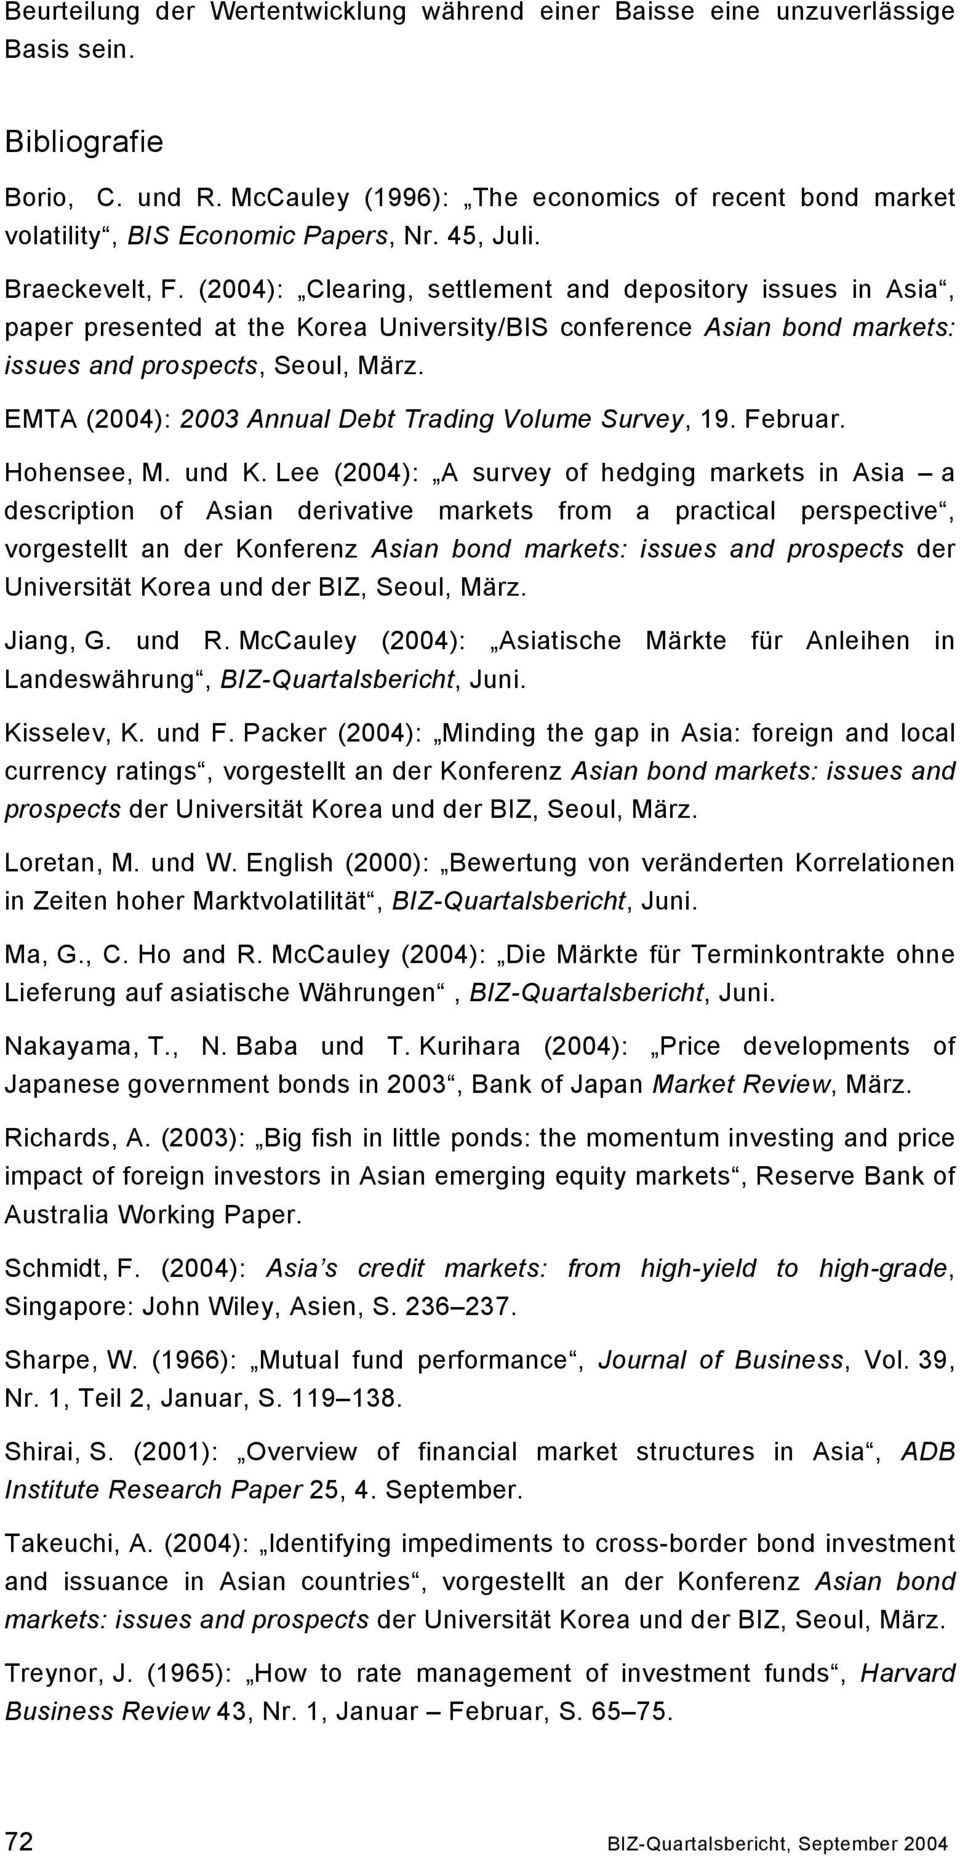 (2004): Clearing, settlement and depository issues in Asia, paper presented at the Korea University/BIS conference Asian bond markets: issues and prospects, Seoul, März.